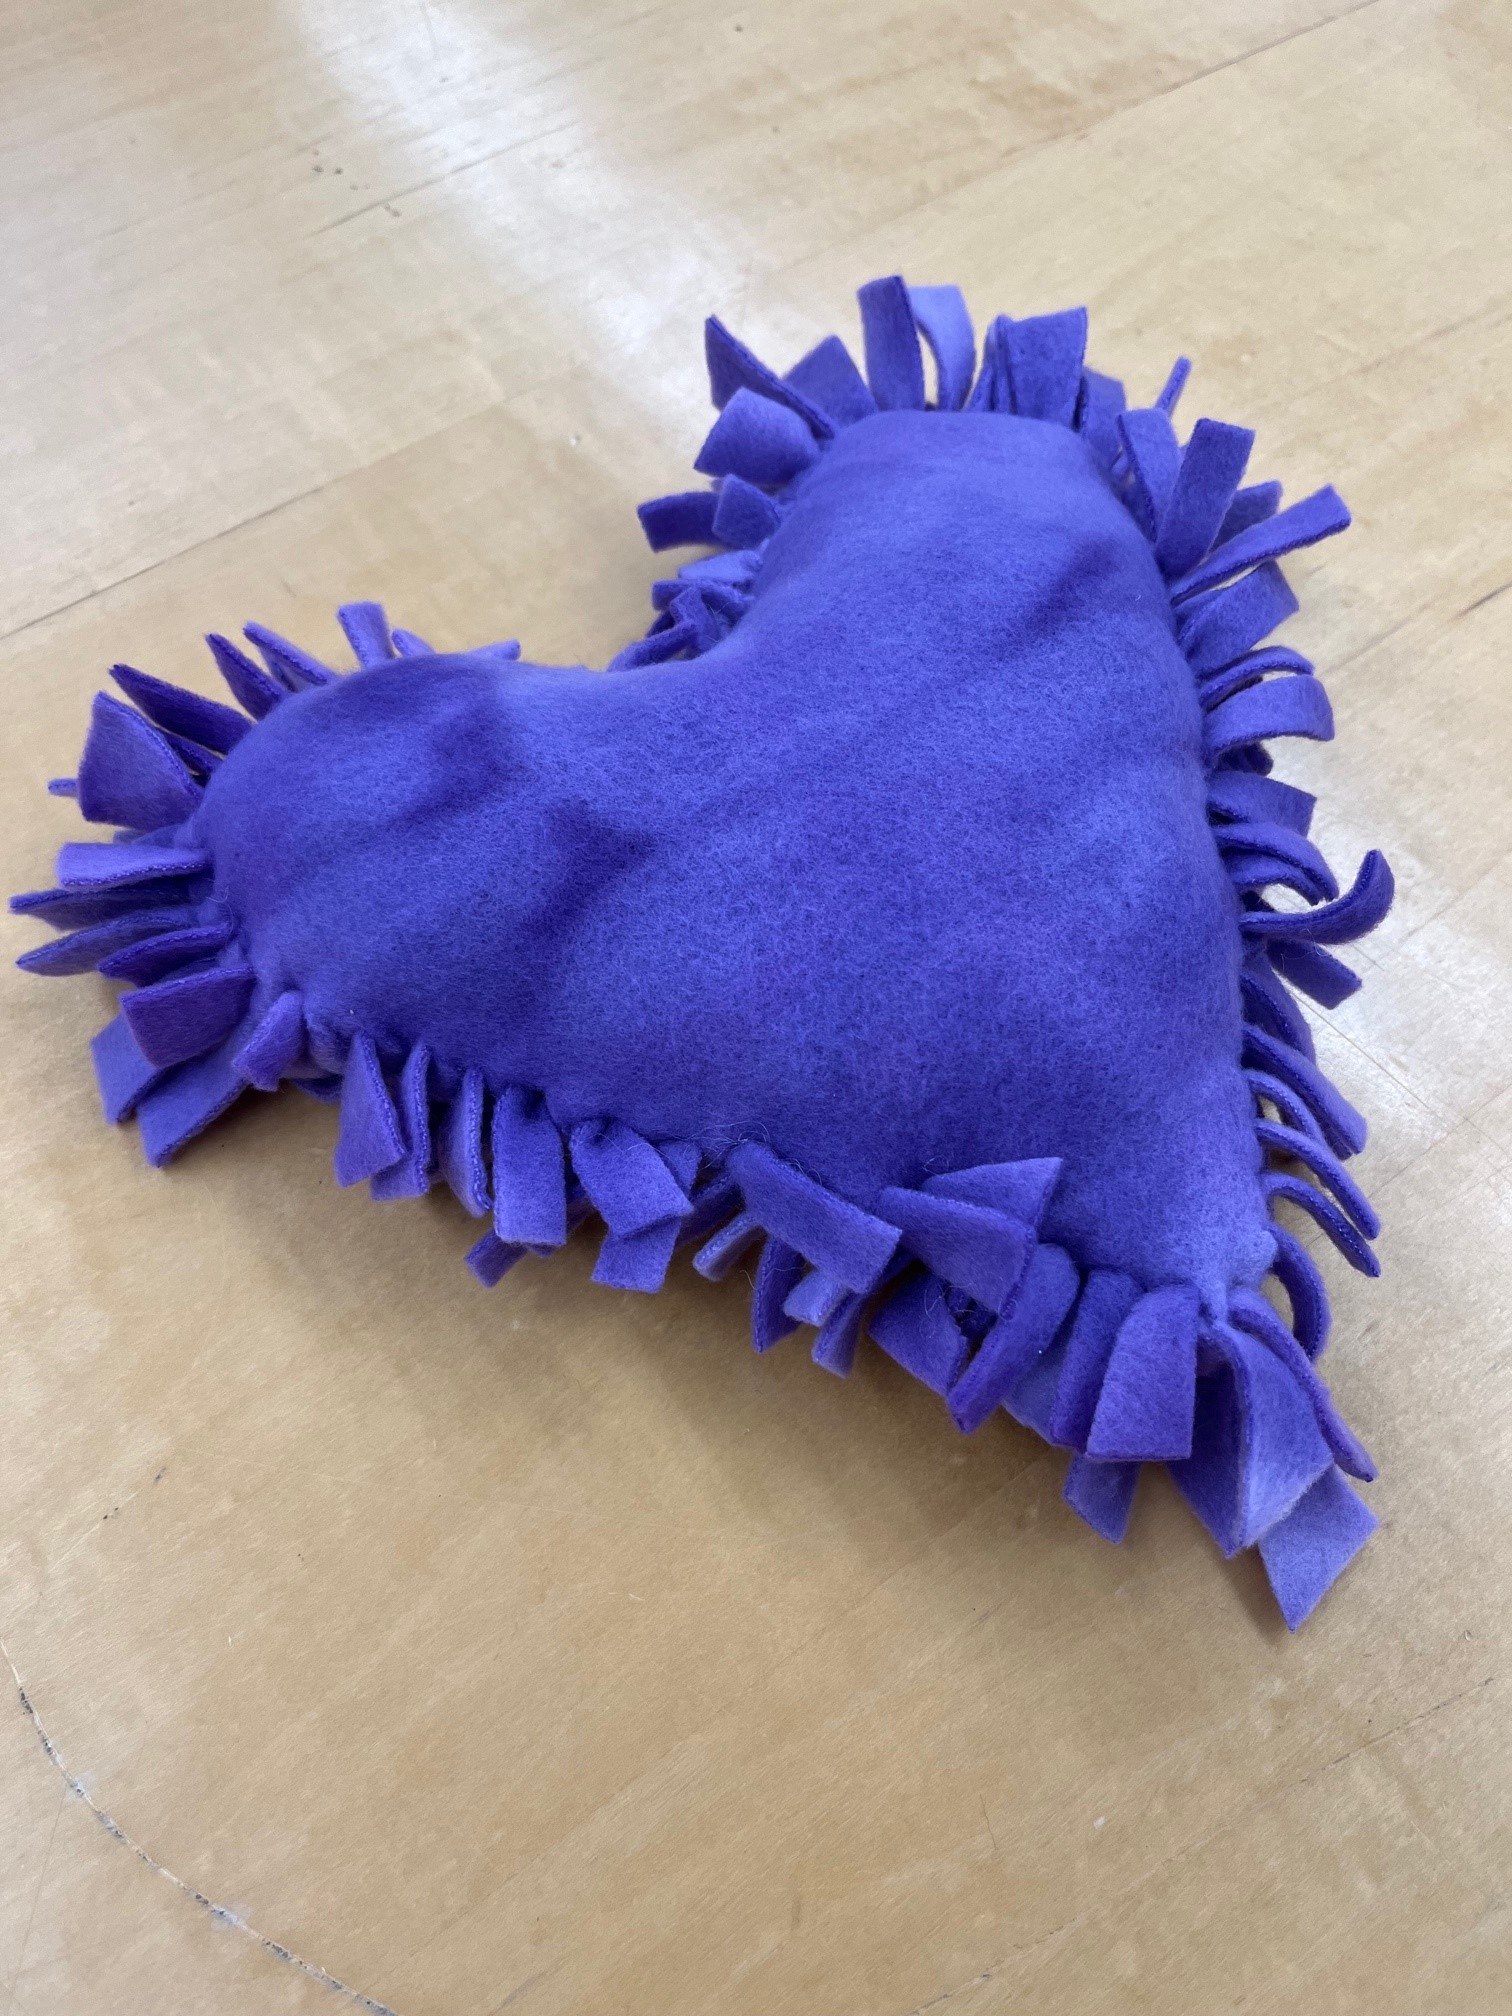 soft purple heart pillow with fringe around outside